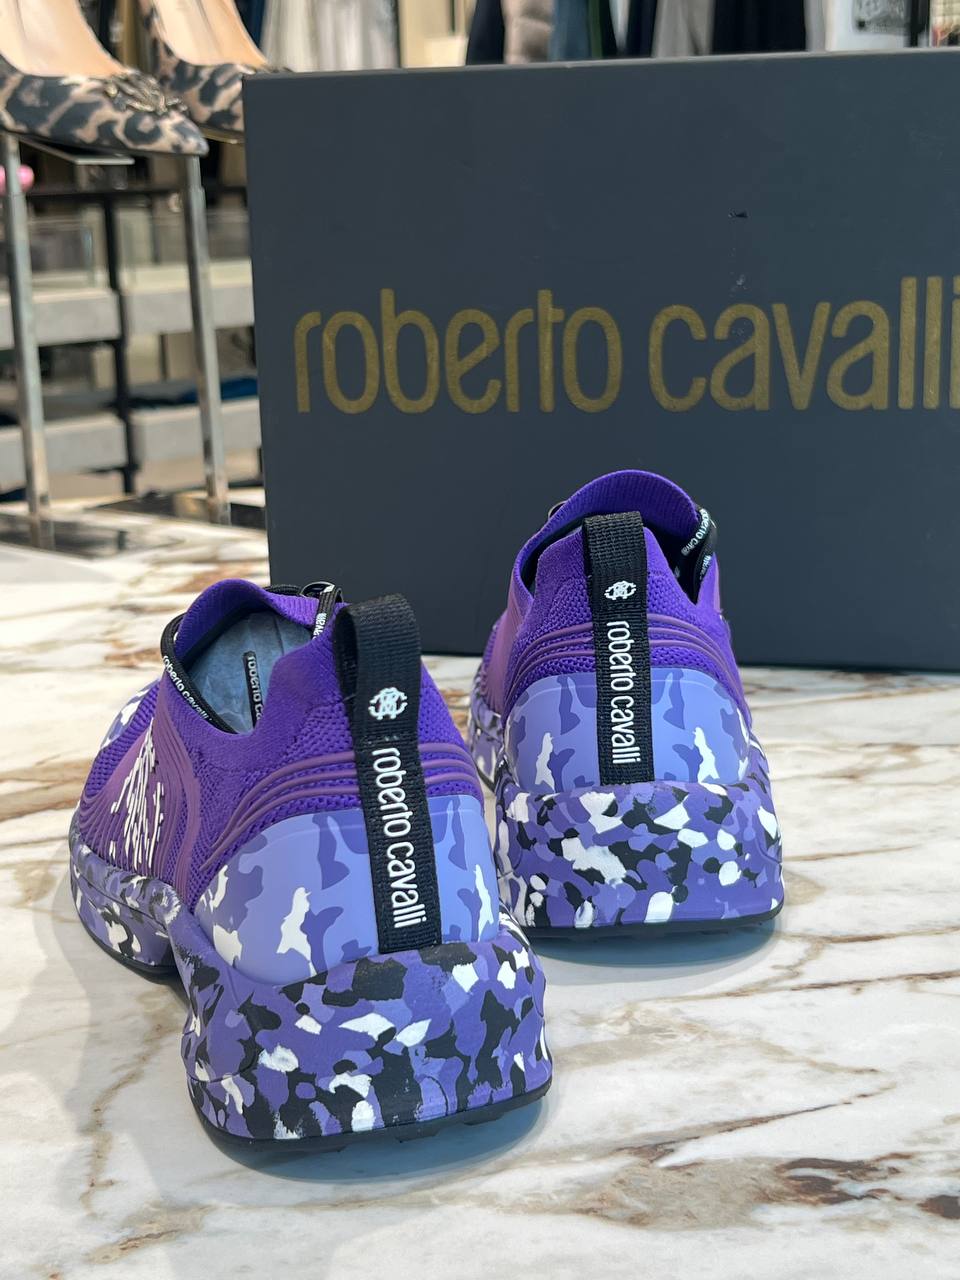 Roberto Cavalli Outlets 5833